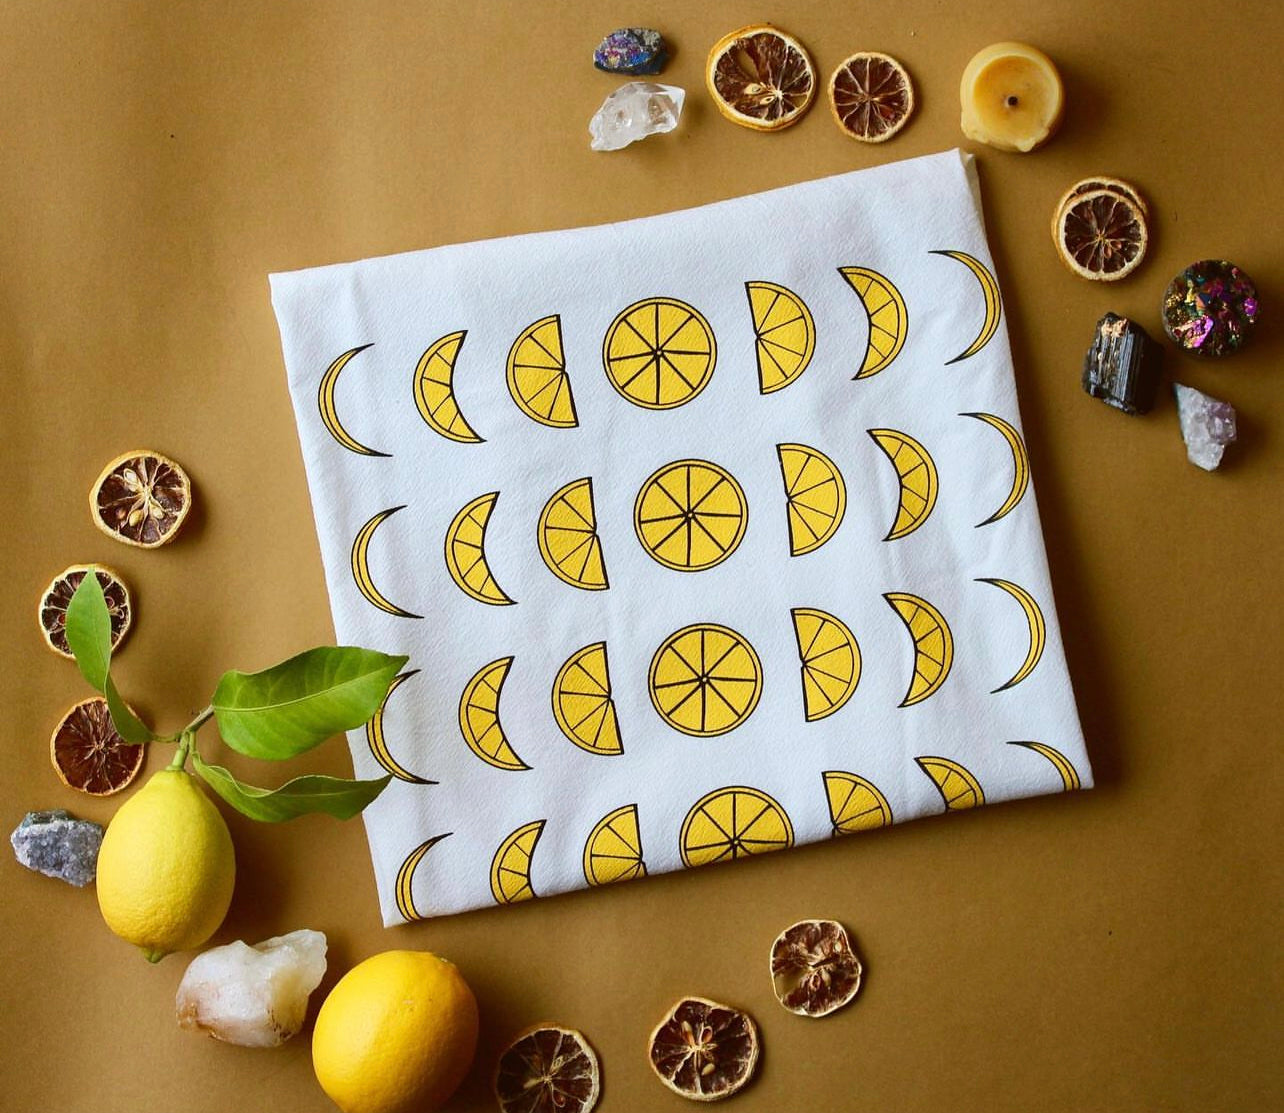 A white tea towel with a yellow lemon moon phase design is surrounded by fresh and preserved lemons